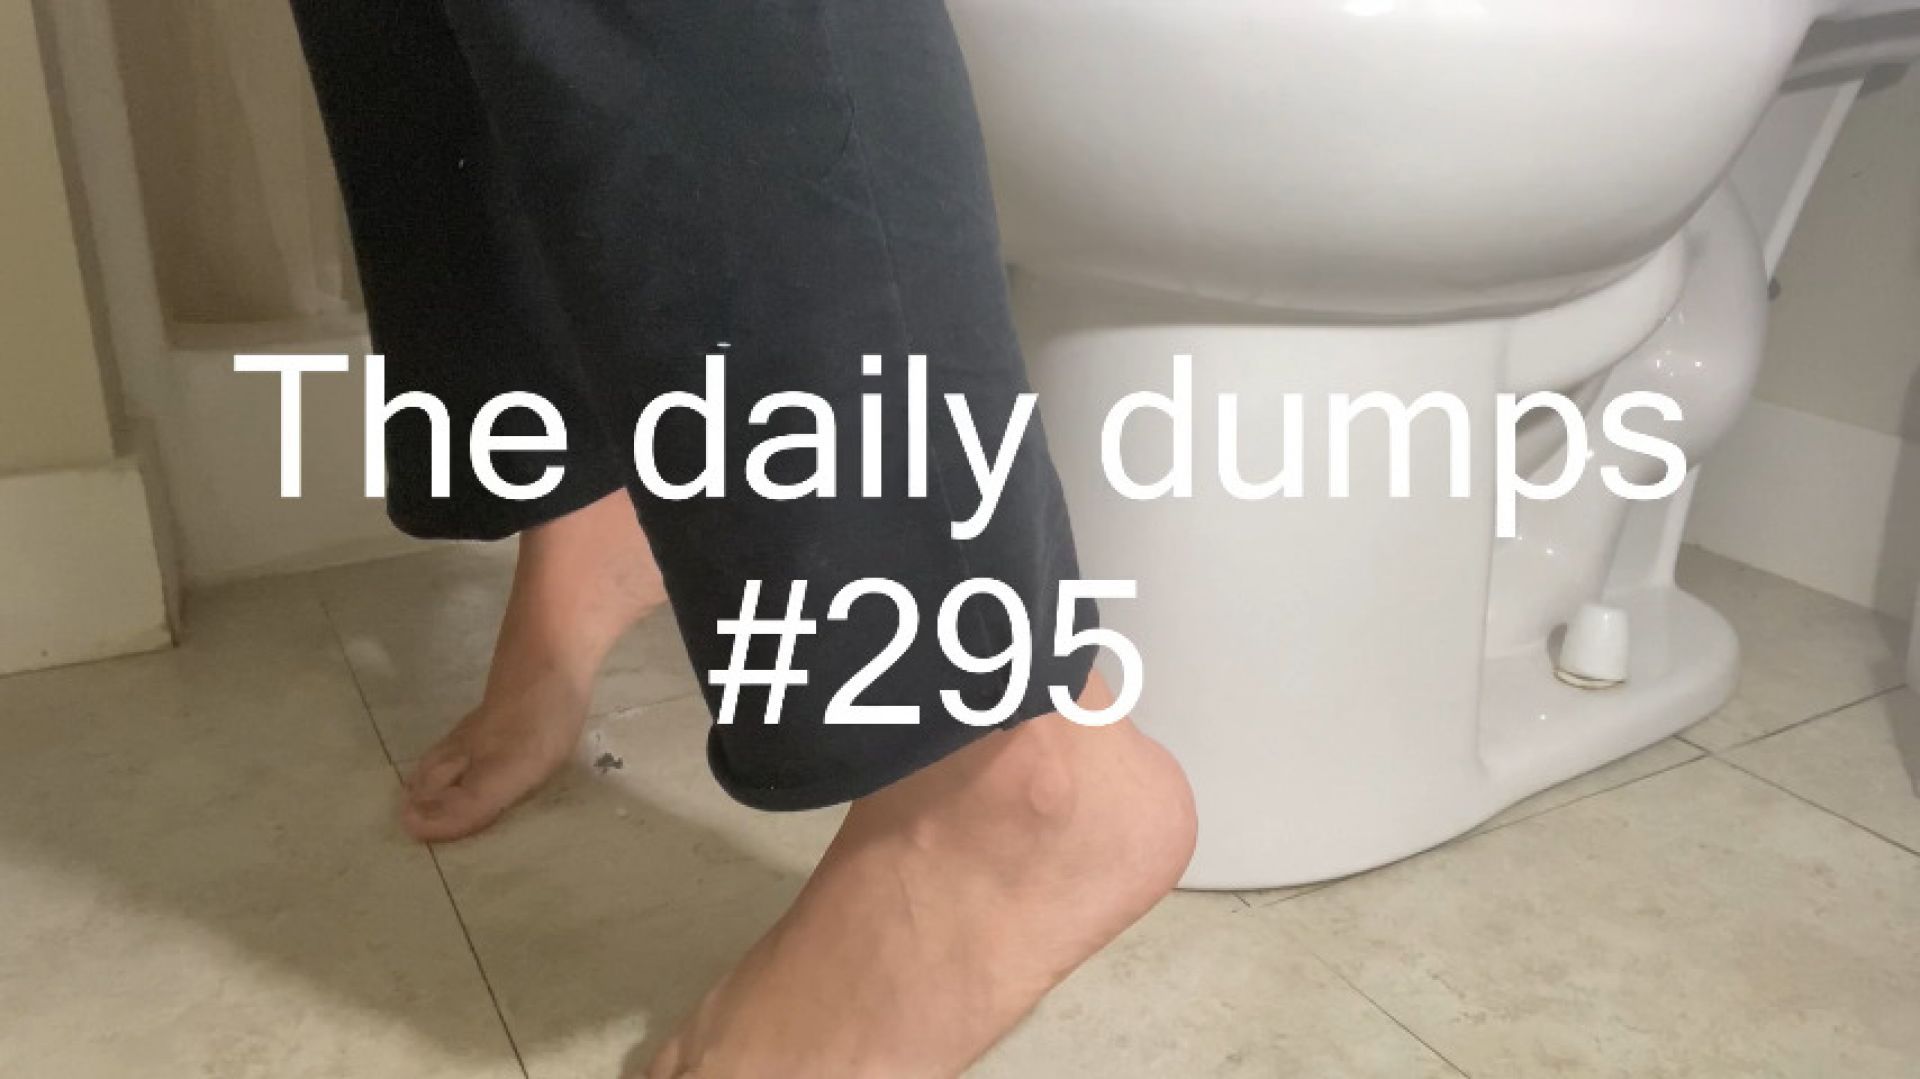 The daily dumps #295